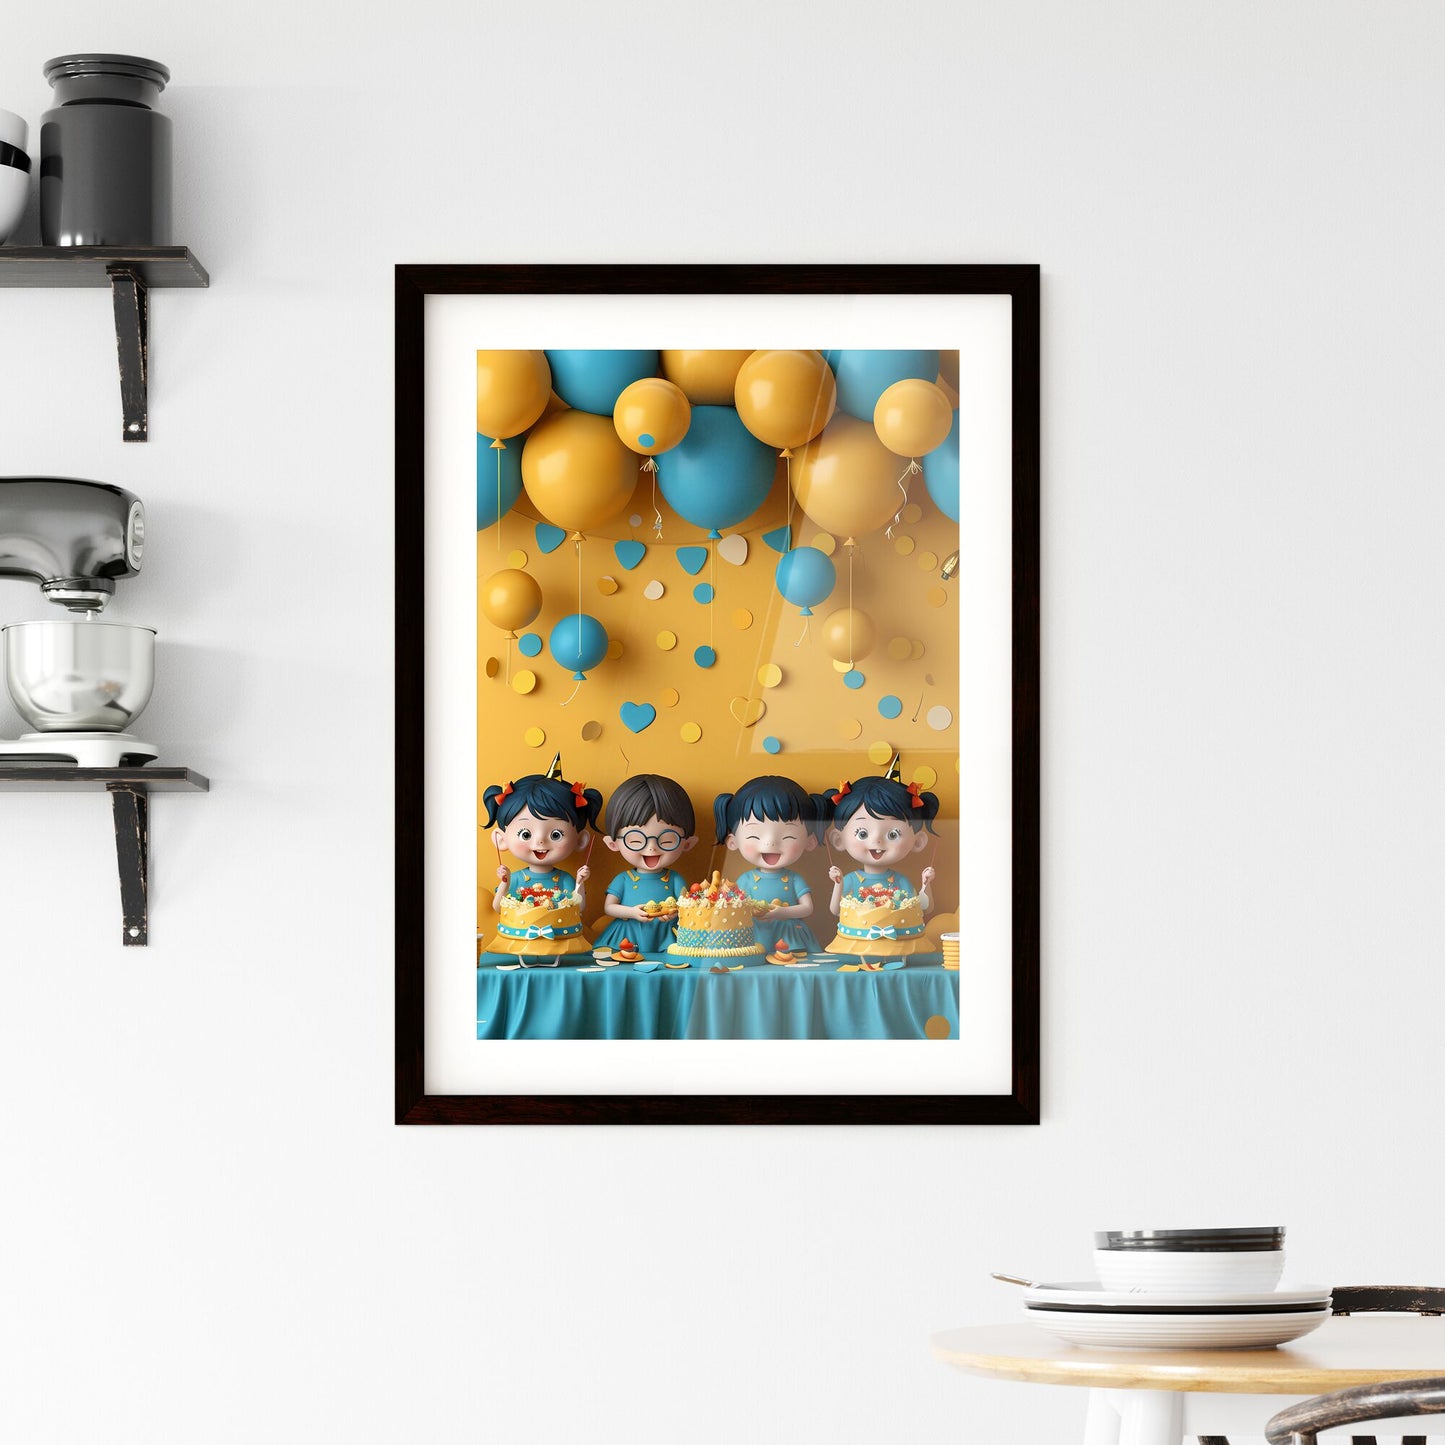 Vibrant Friendship Day Celebration Poster Template Featuring Cartoon Girls, Cake, and Balloons with Artistic Flair Default Title